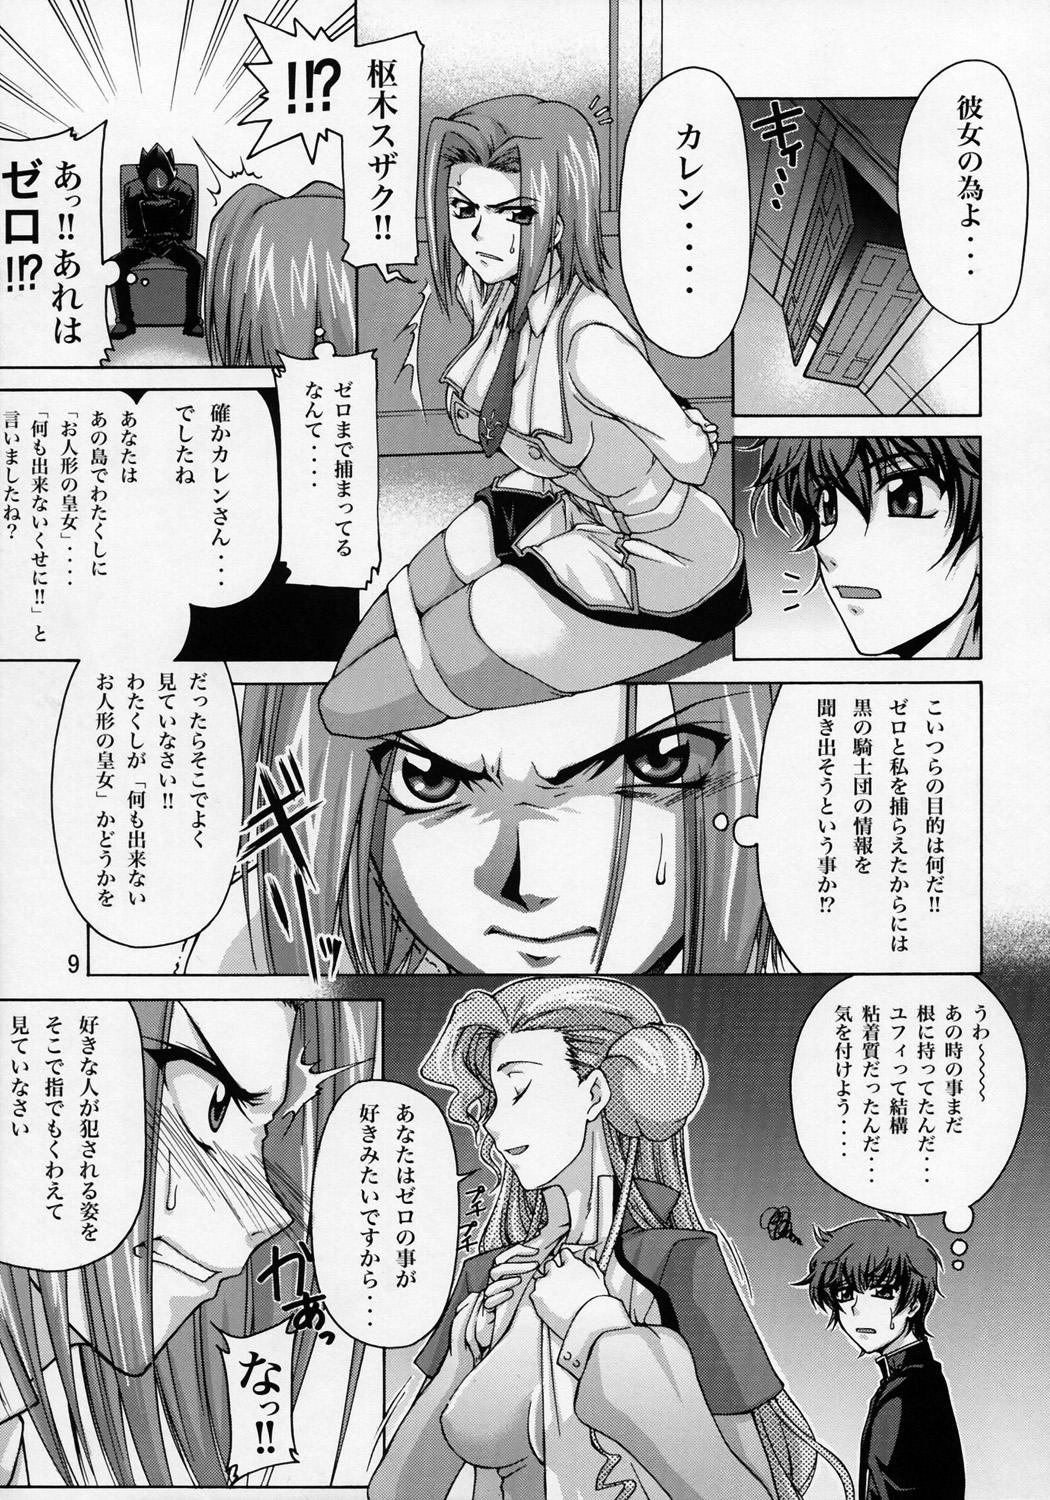 Menage CG²R 01 - Code geass Dykes - Page 8